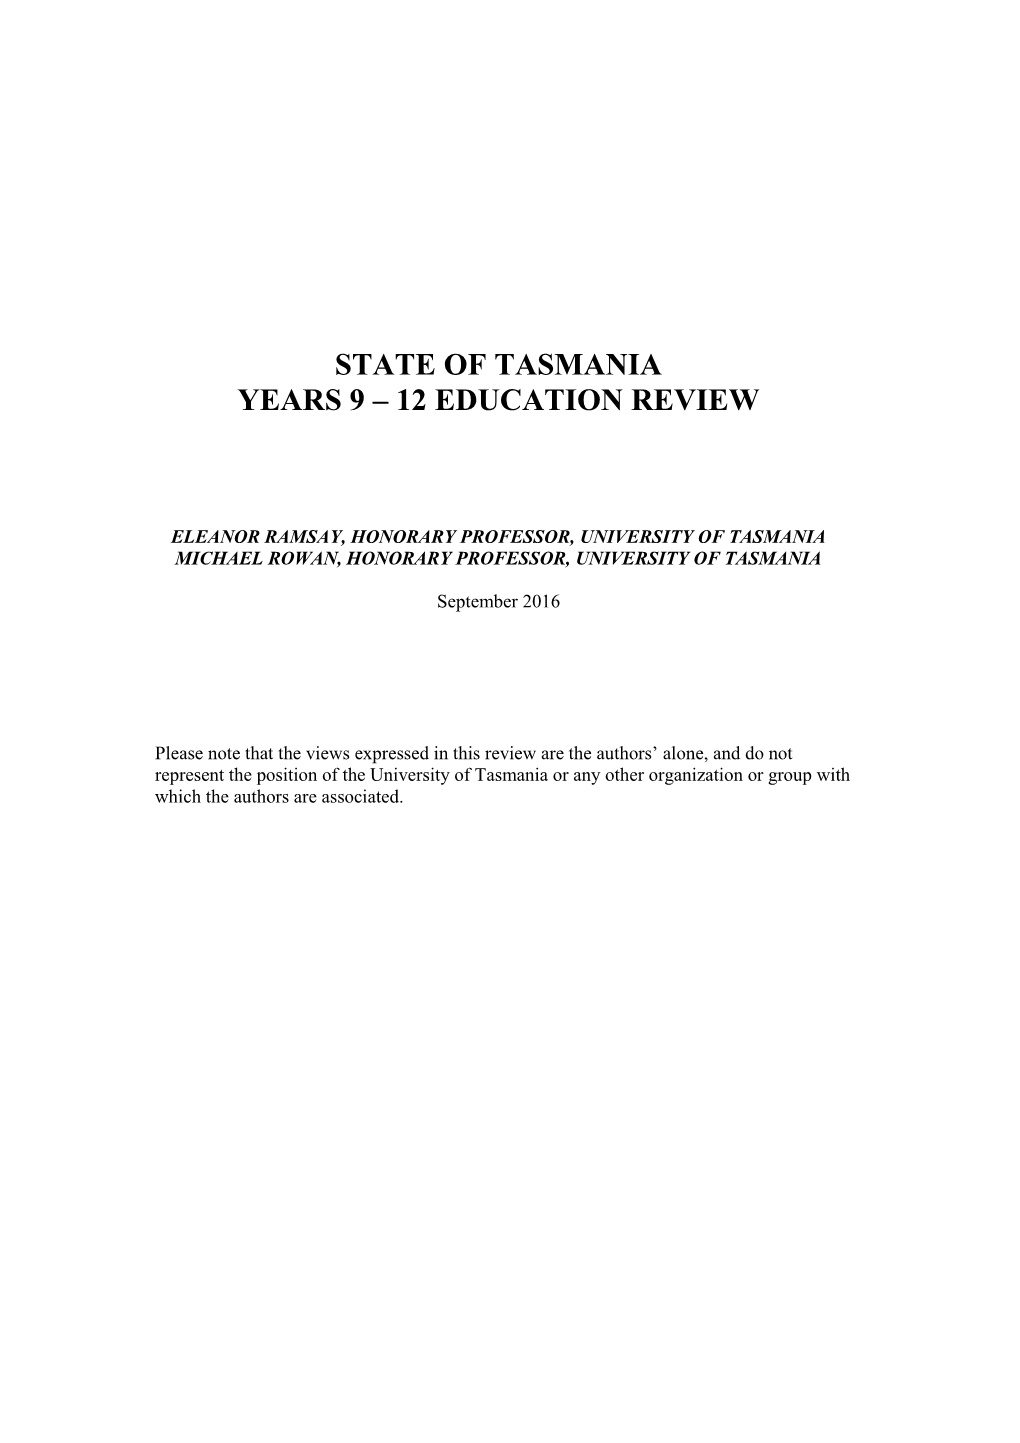 State of Tasmania Years 9 – 12 Education Review